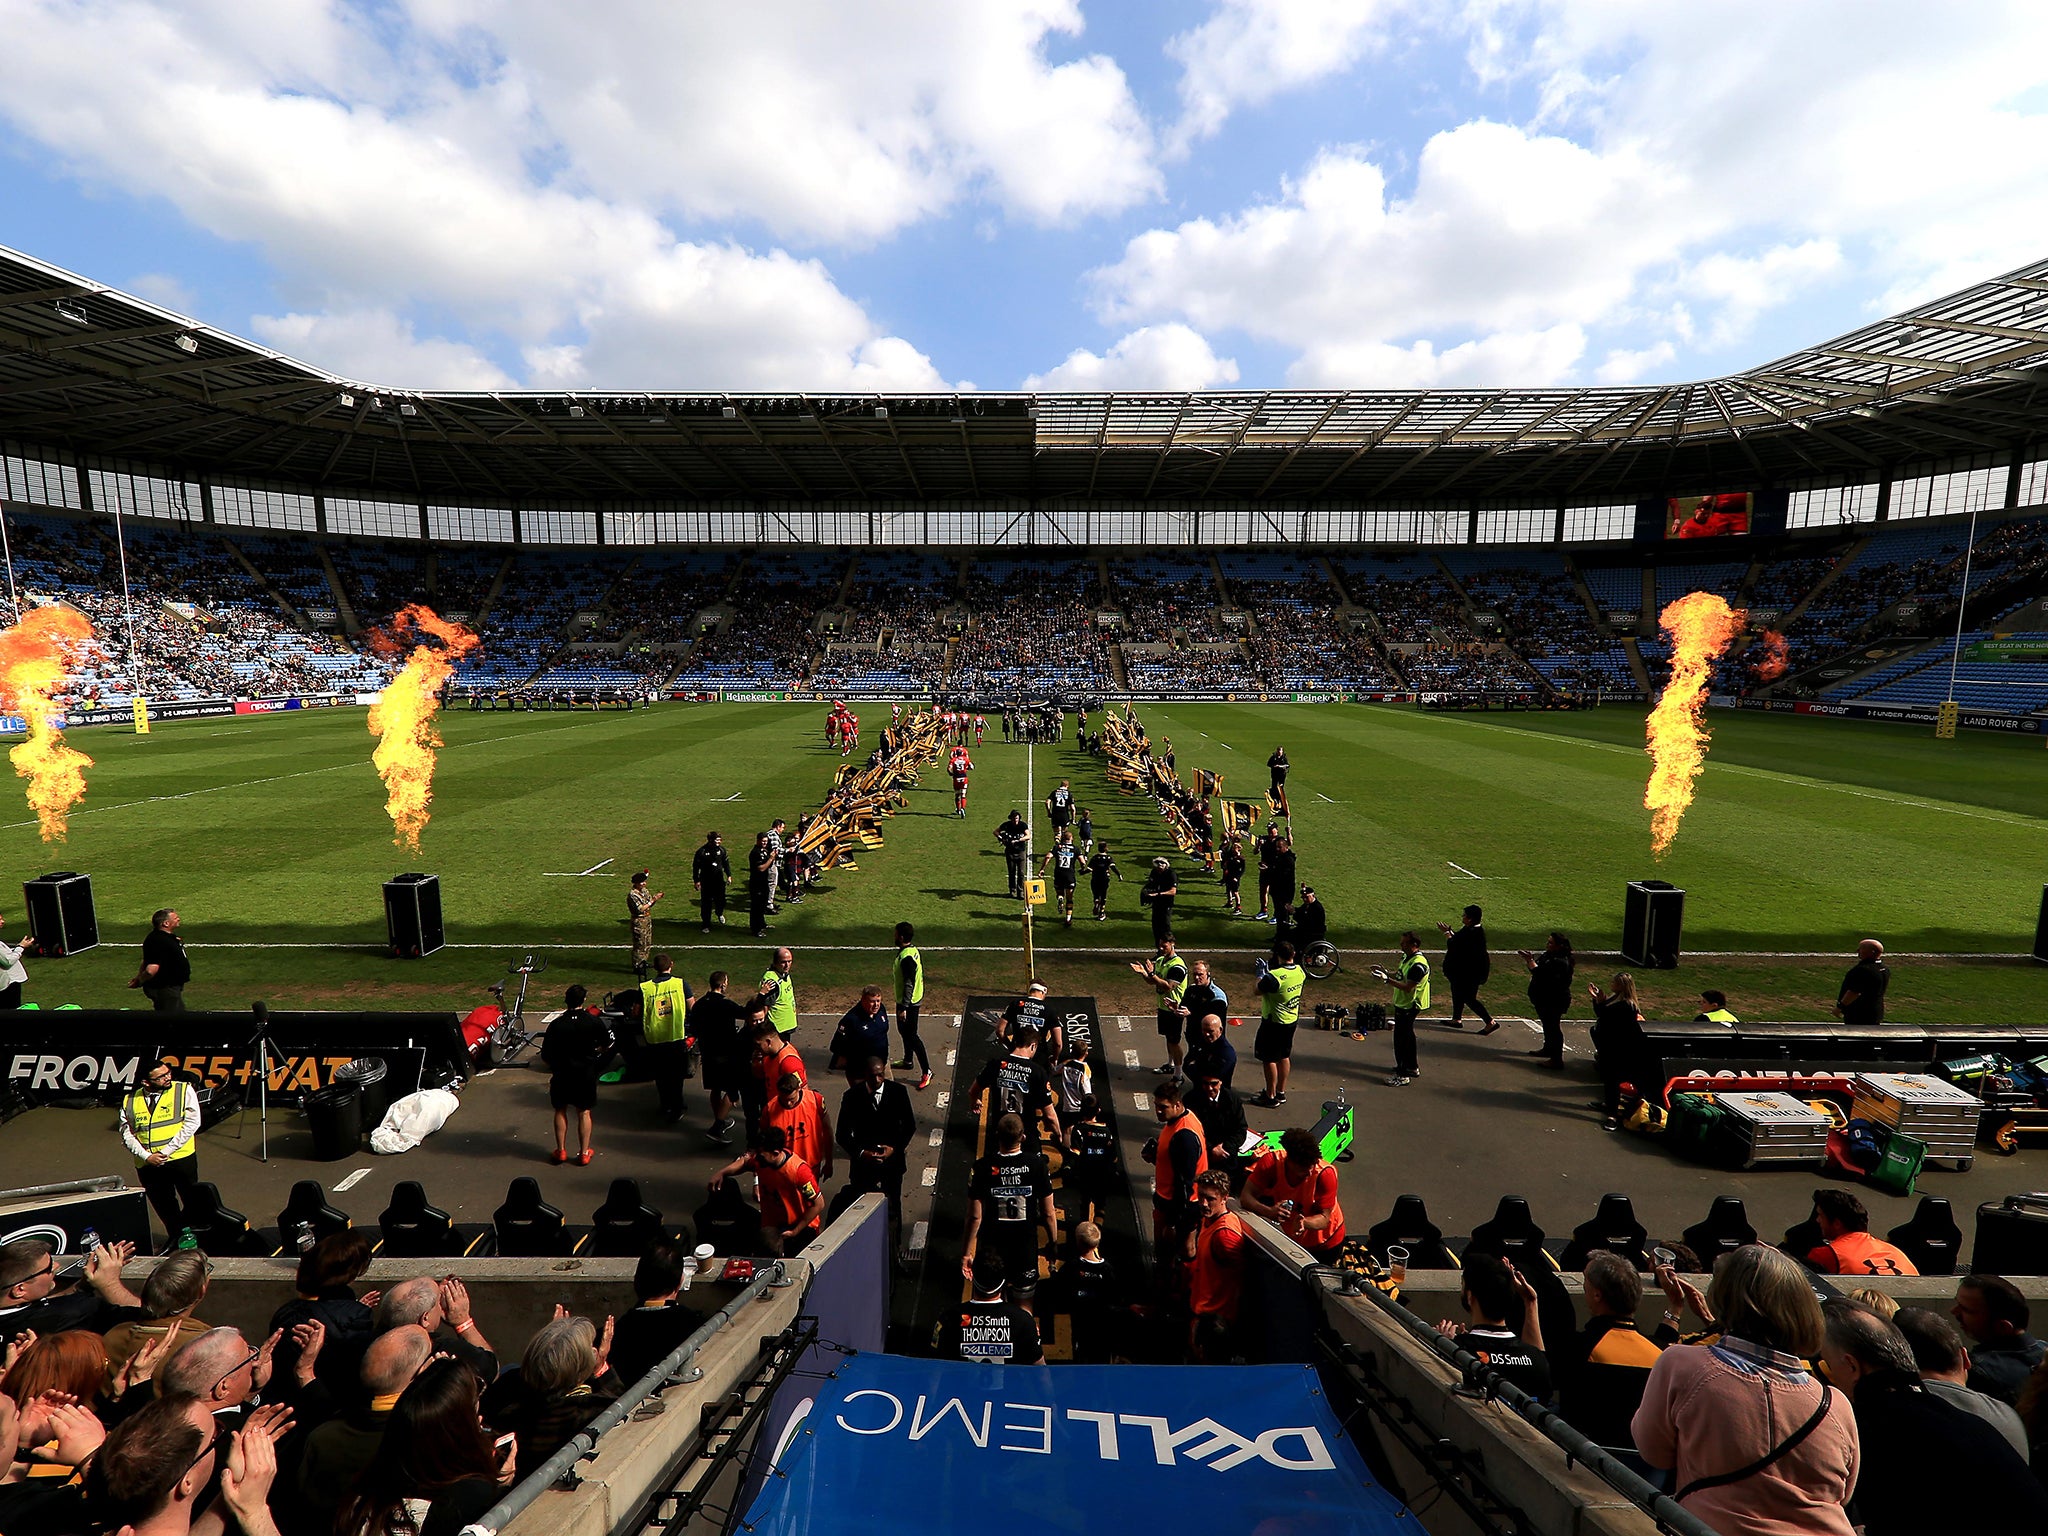 Wasps have owned the Ricoh Arena since 2014